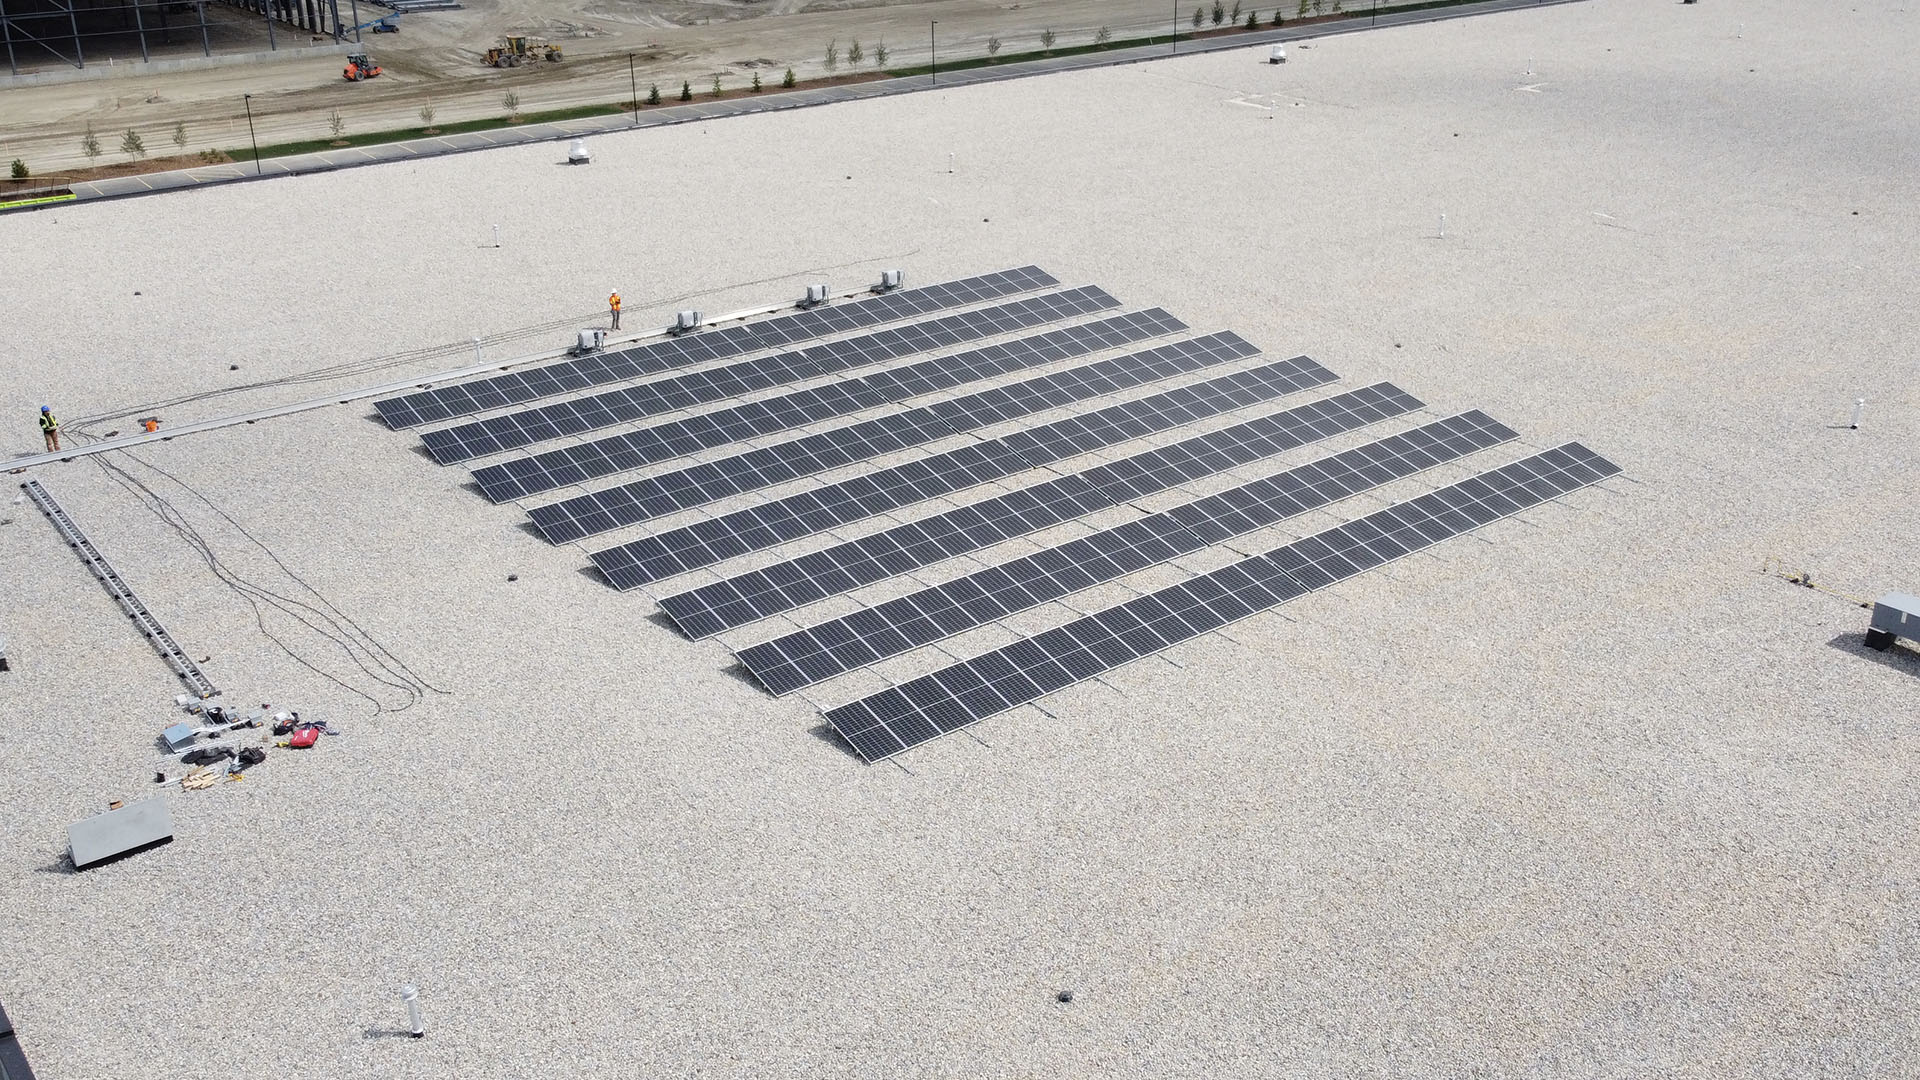 drone photo of solar panels on building roof